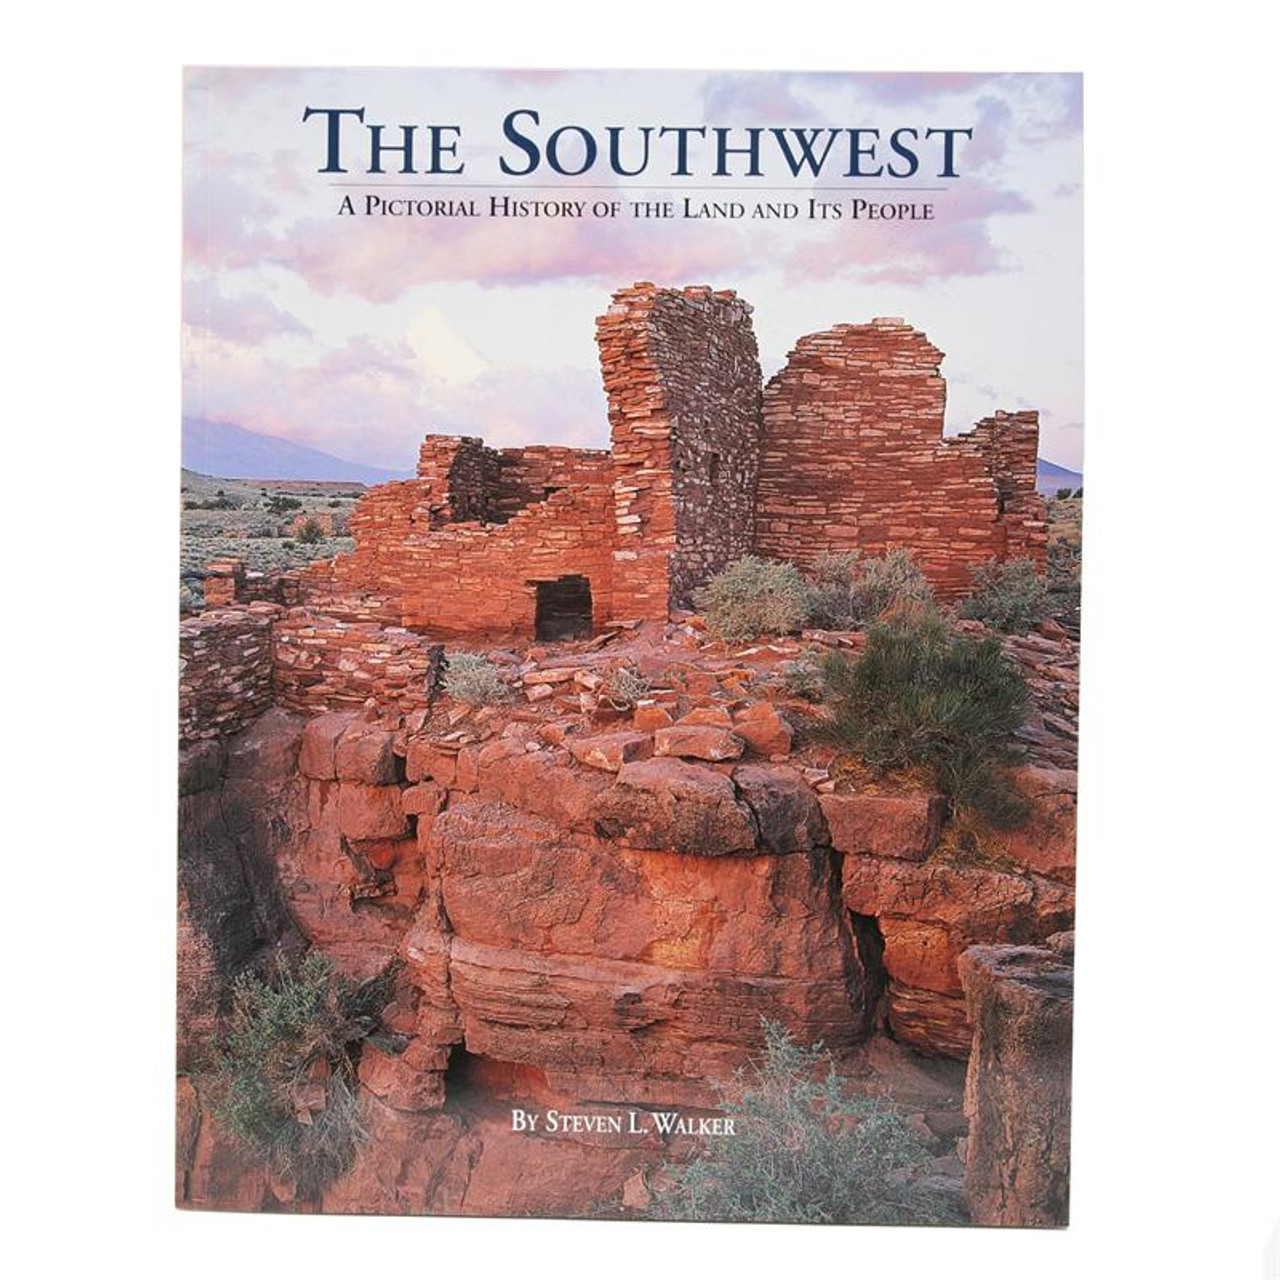 The Southwest - A Pictorial History of the Land and Its People